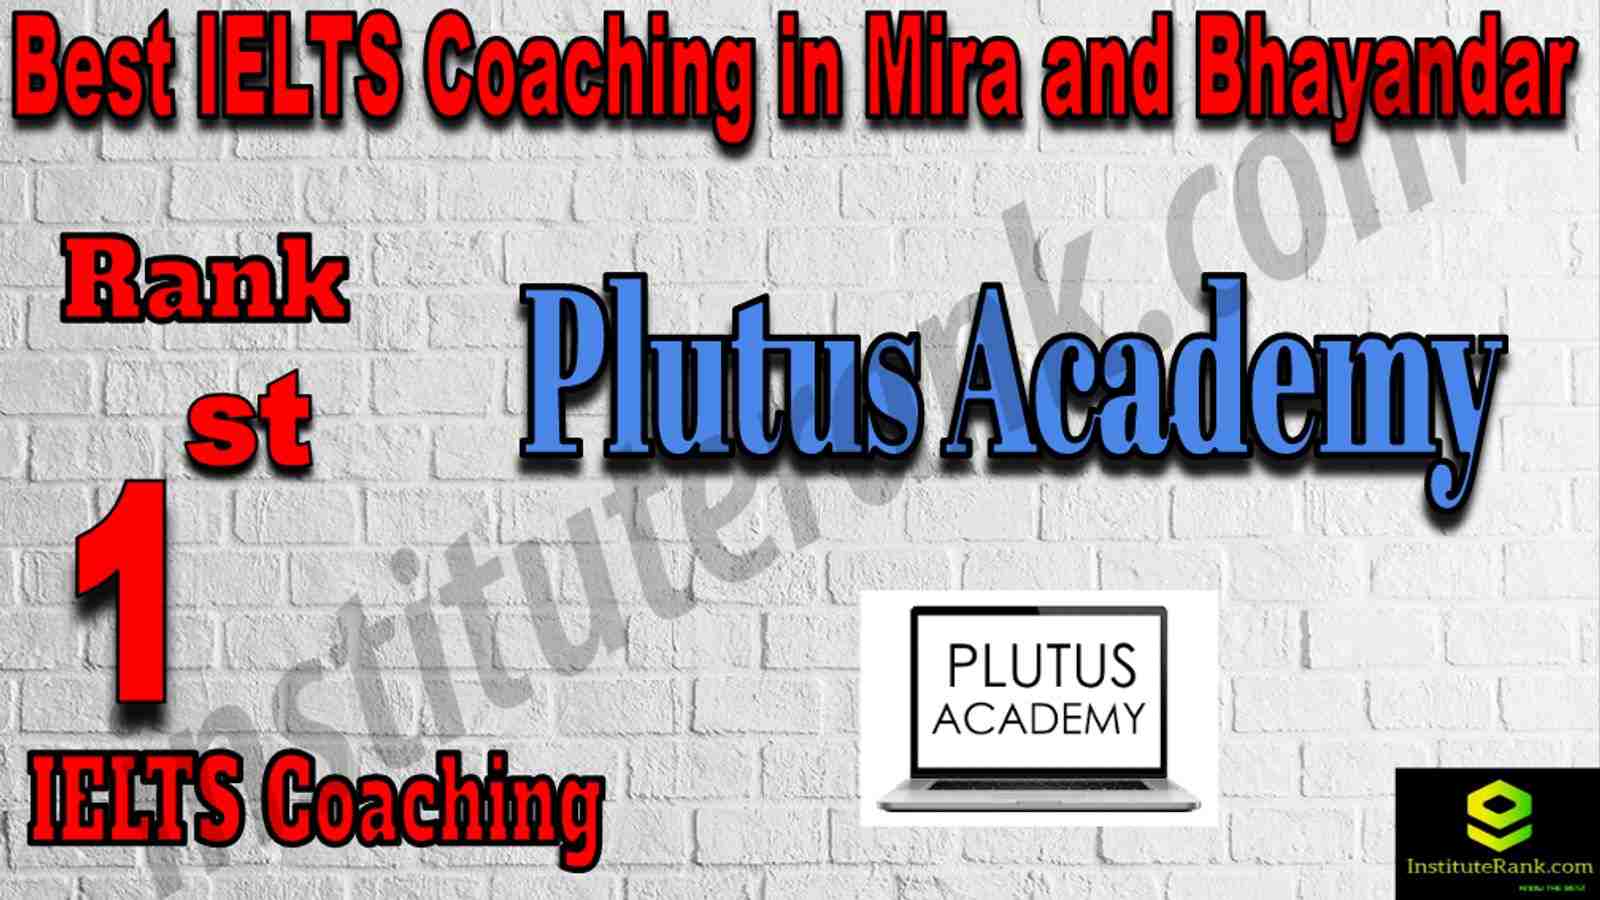 1st Best IELTS Coaching in Mira and Bhayandar